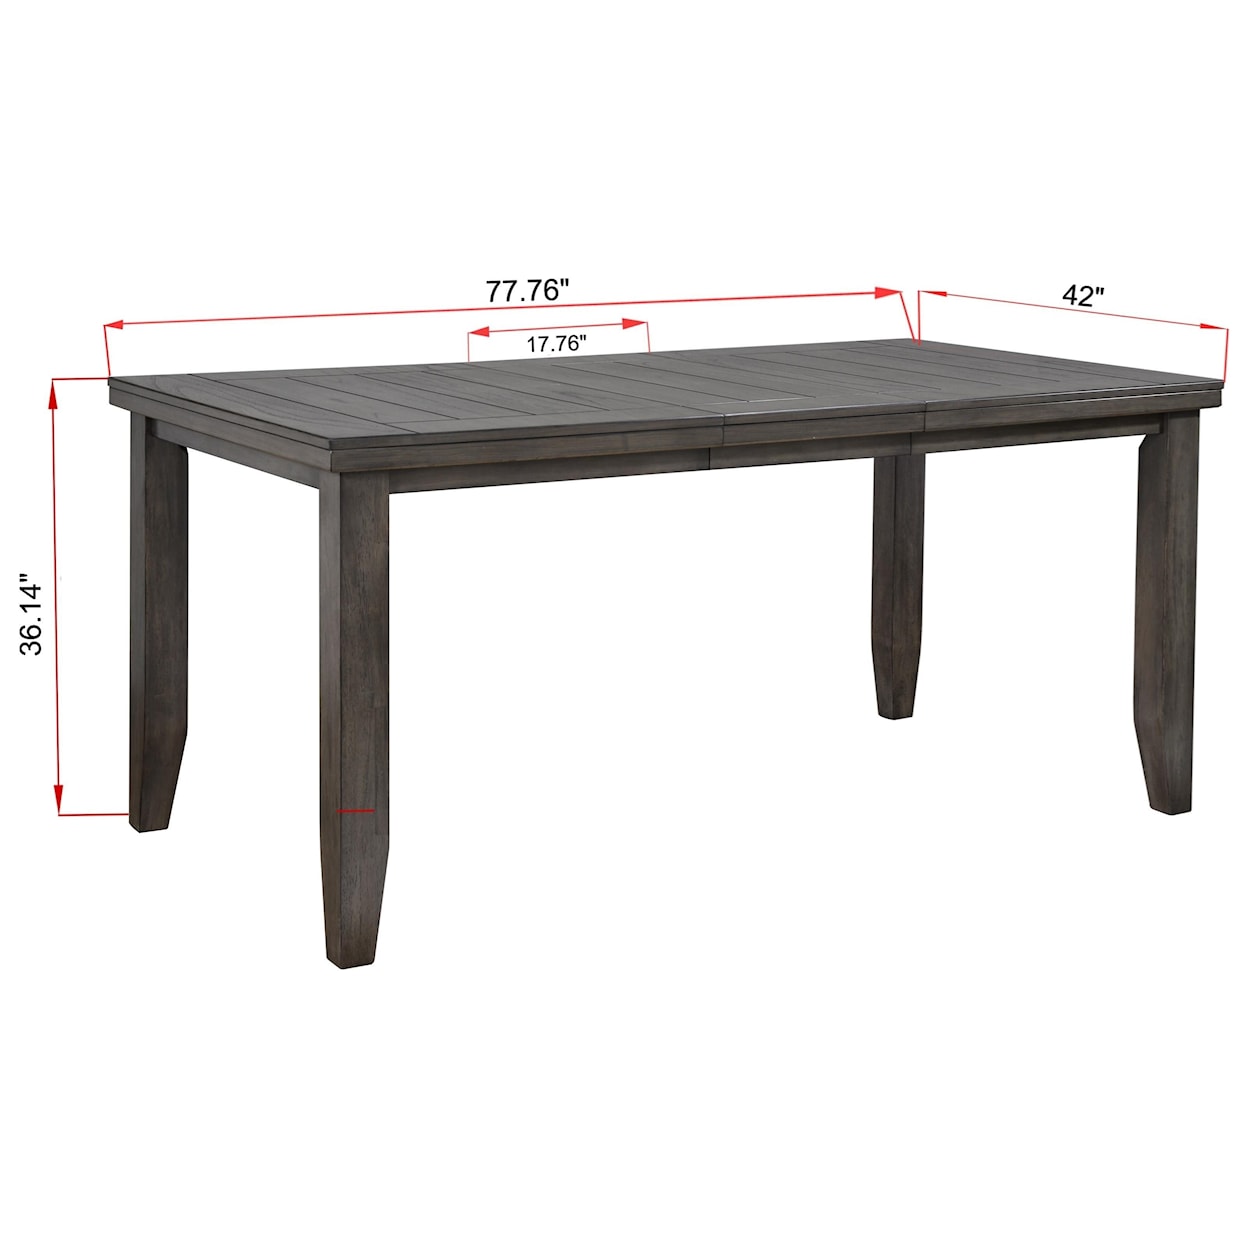 CM Bardstown Counter Height Table